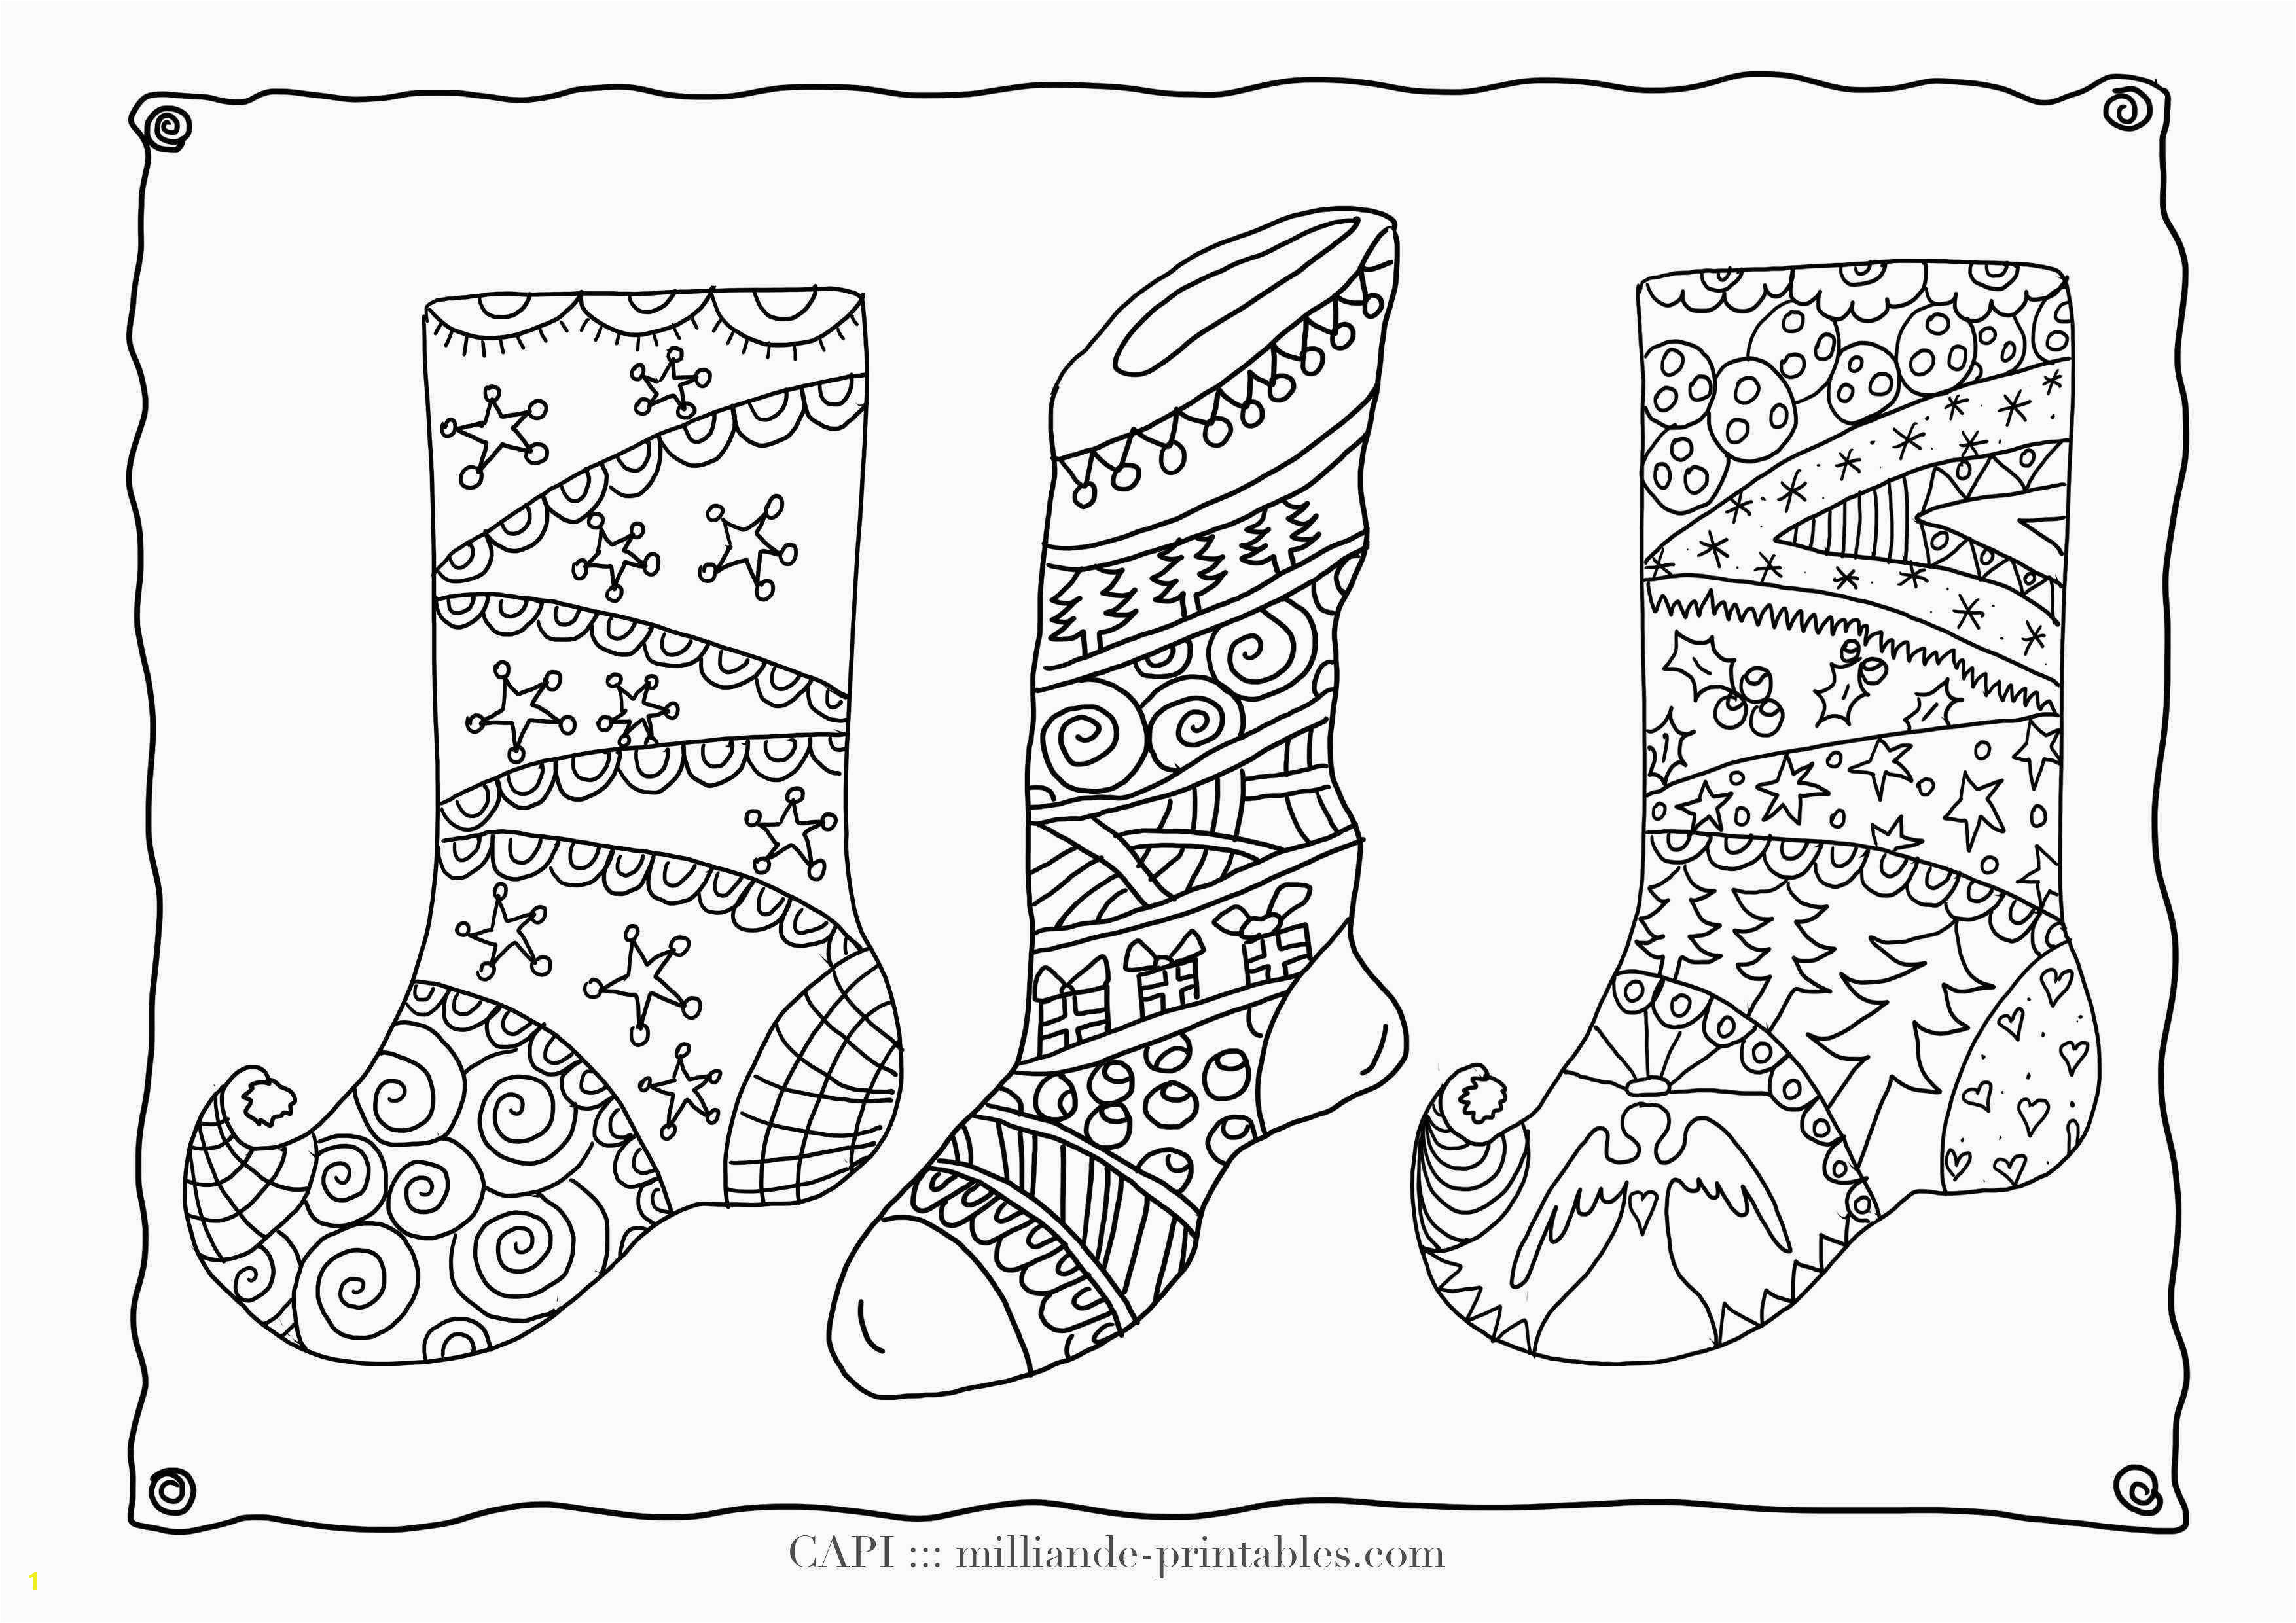 Free Printable Christmas Coloring Pages for Kindergarten New Free Christmas Coloring Pages